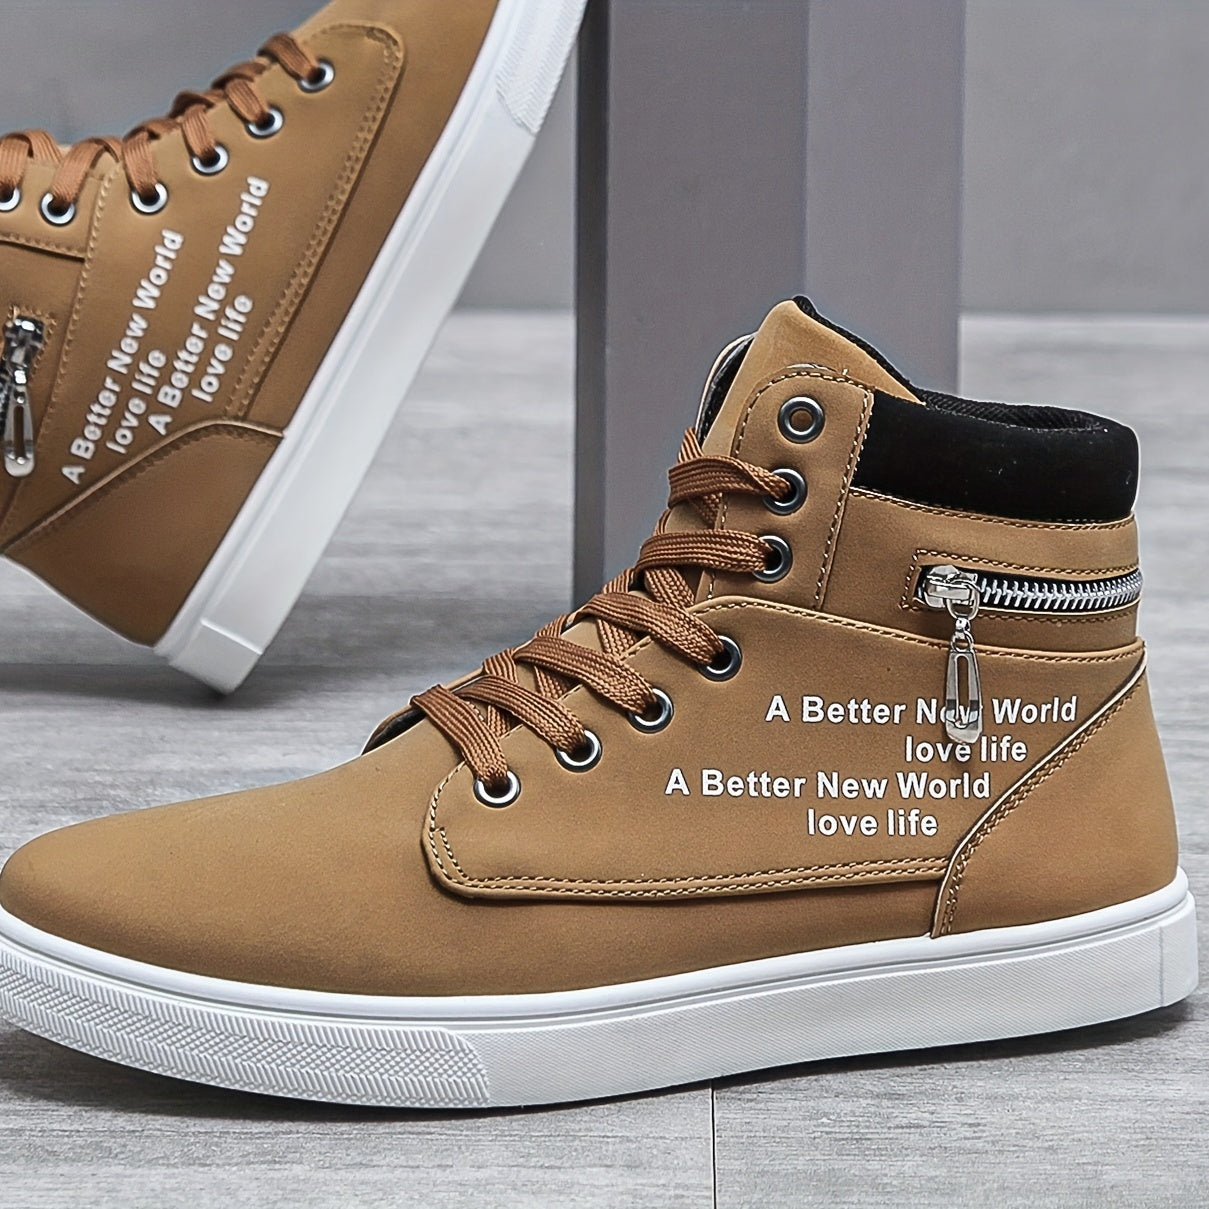 Lace-up High Top Zipper Skate Shoes, Breathable Sneakers